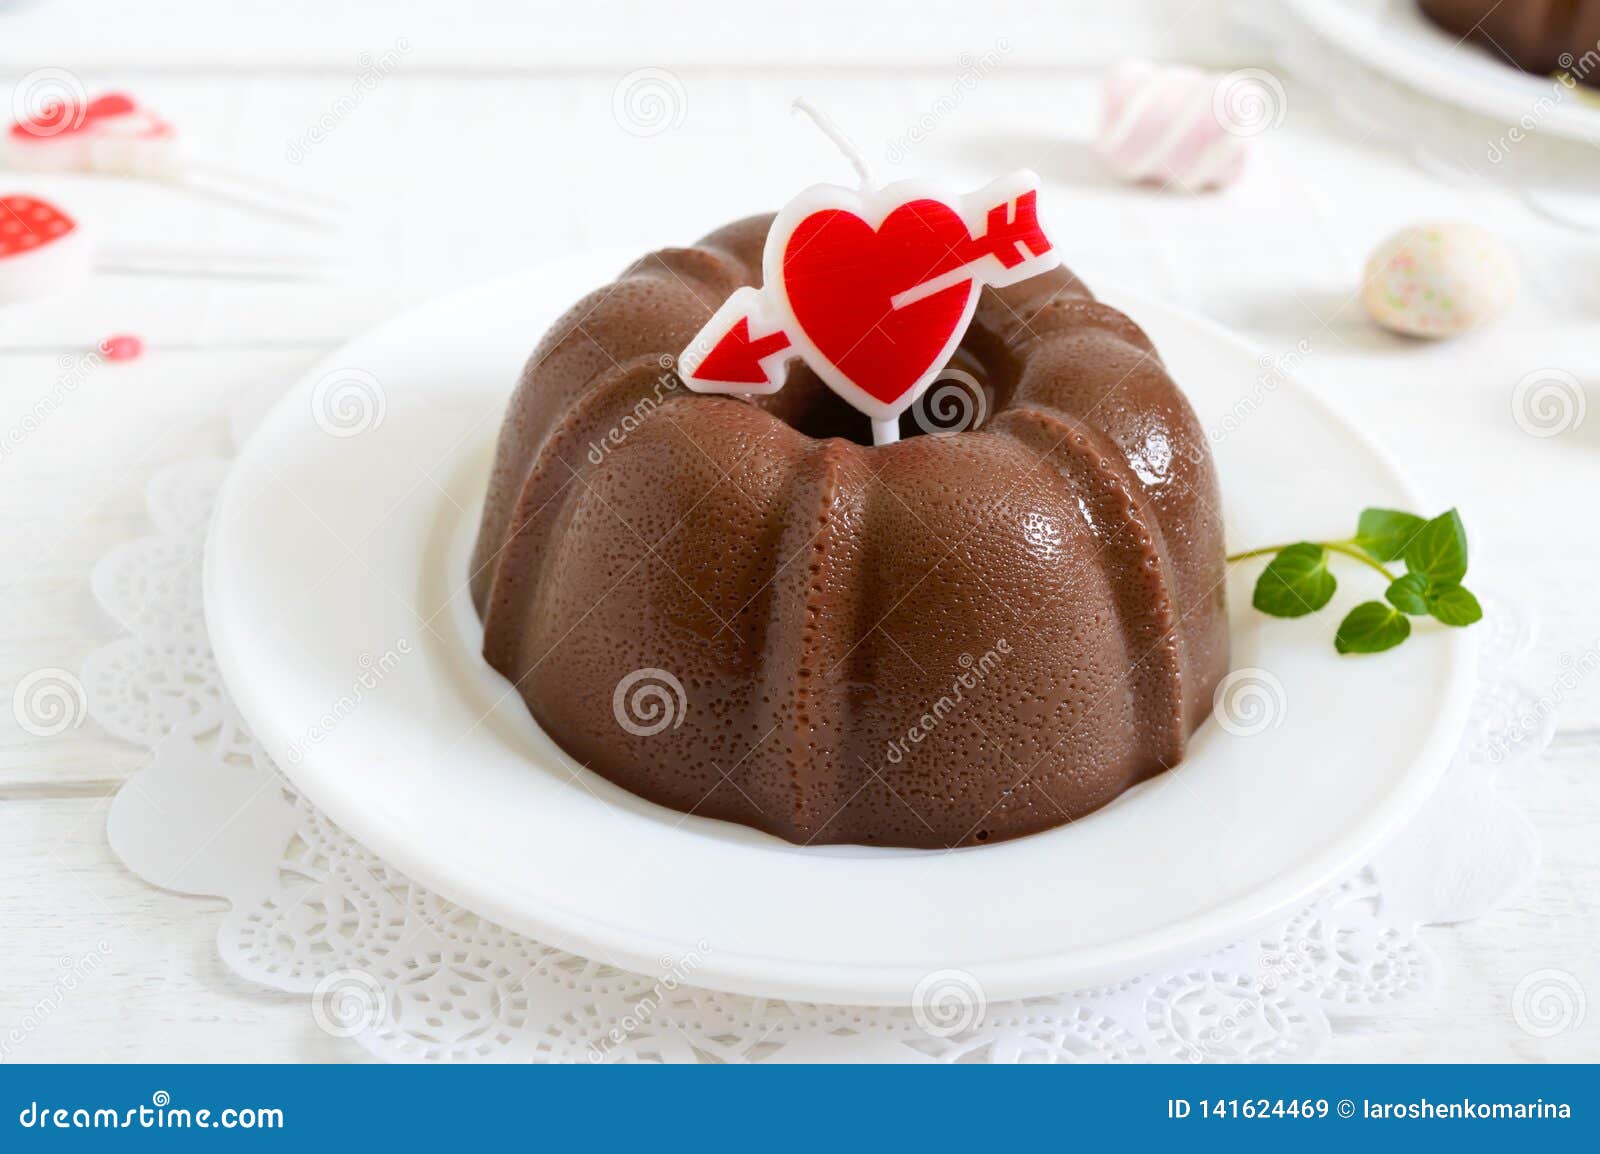 Tasty Chocolate Pudding On Plates On A White Wooden Background. Light Low-calorie Dessert Stock ...